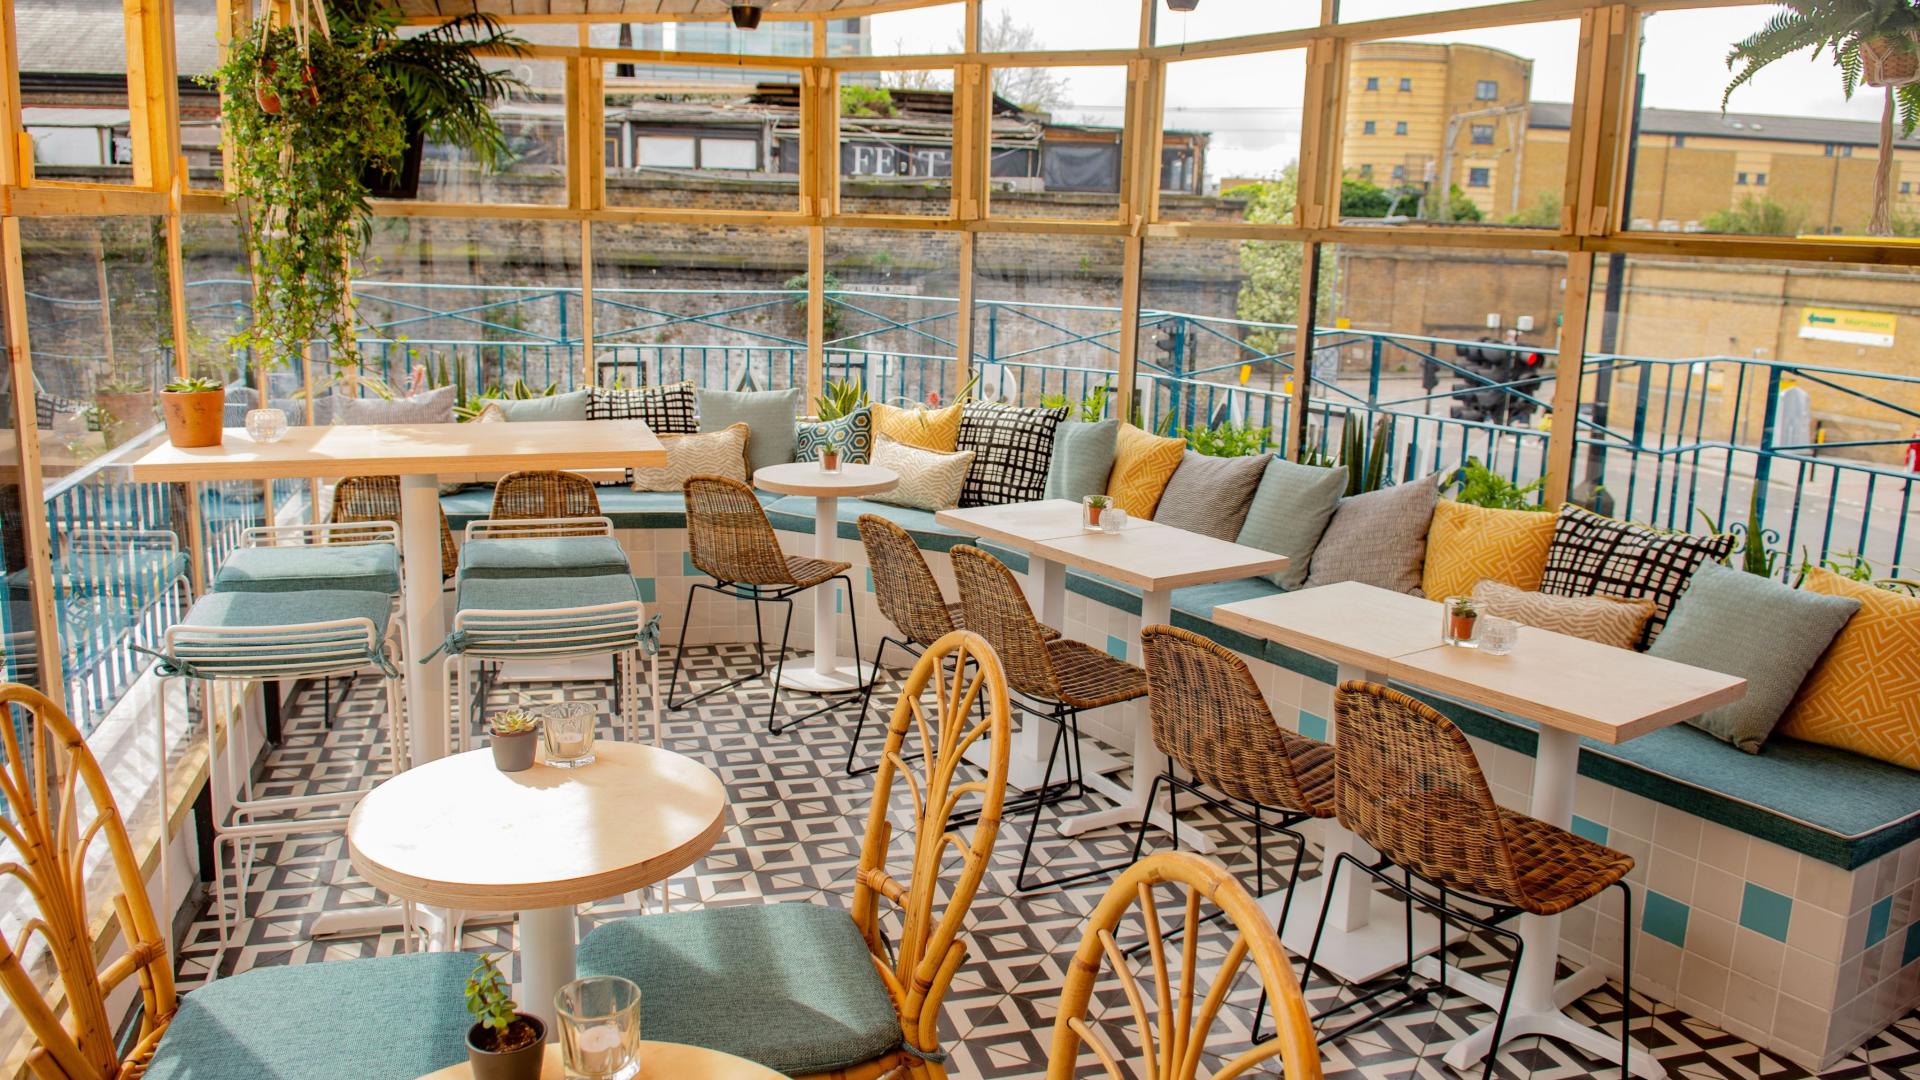 Terrace Venues for Hire in London